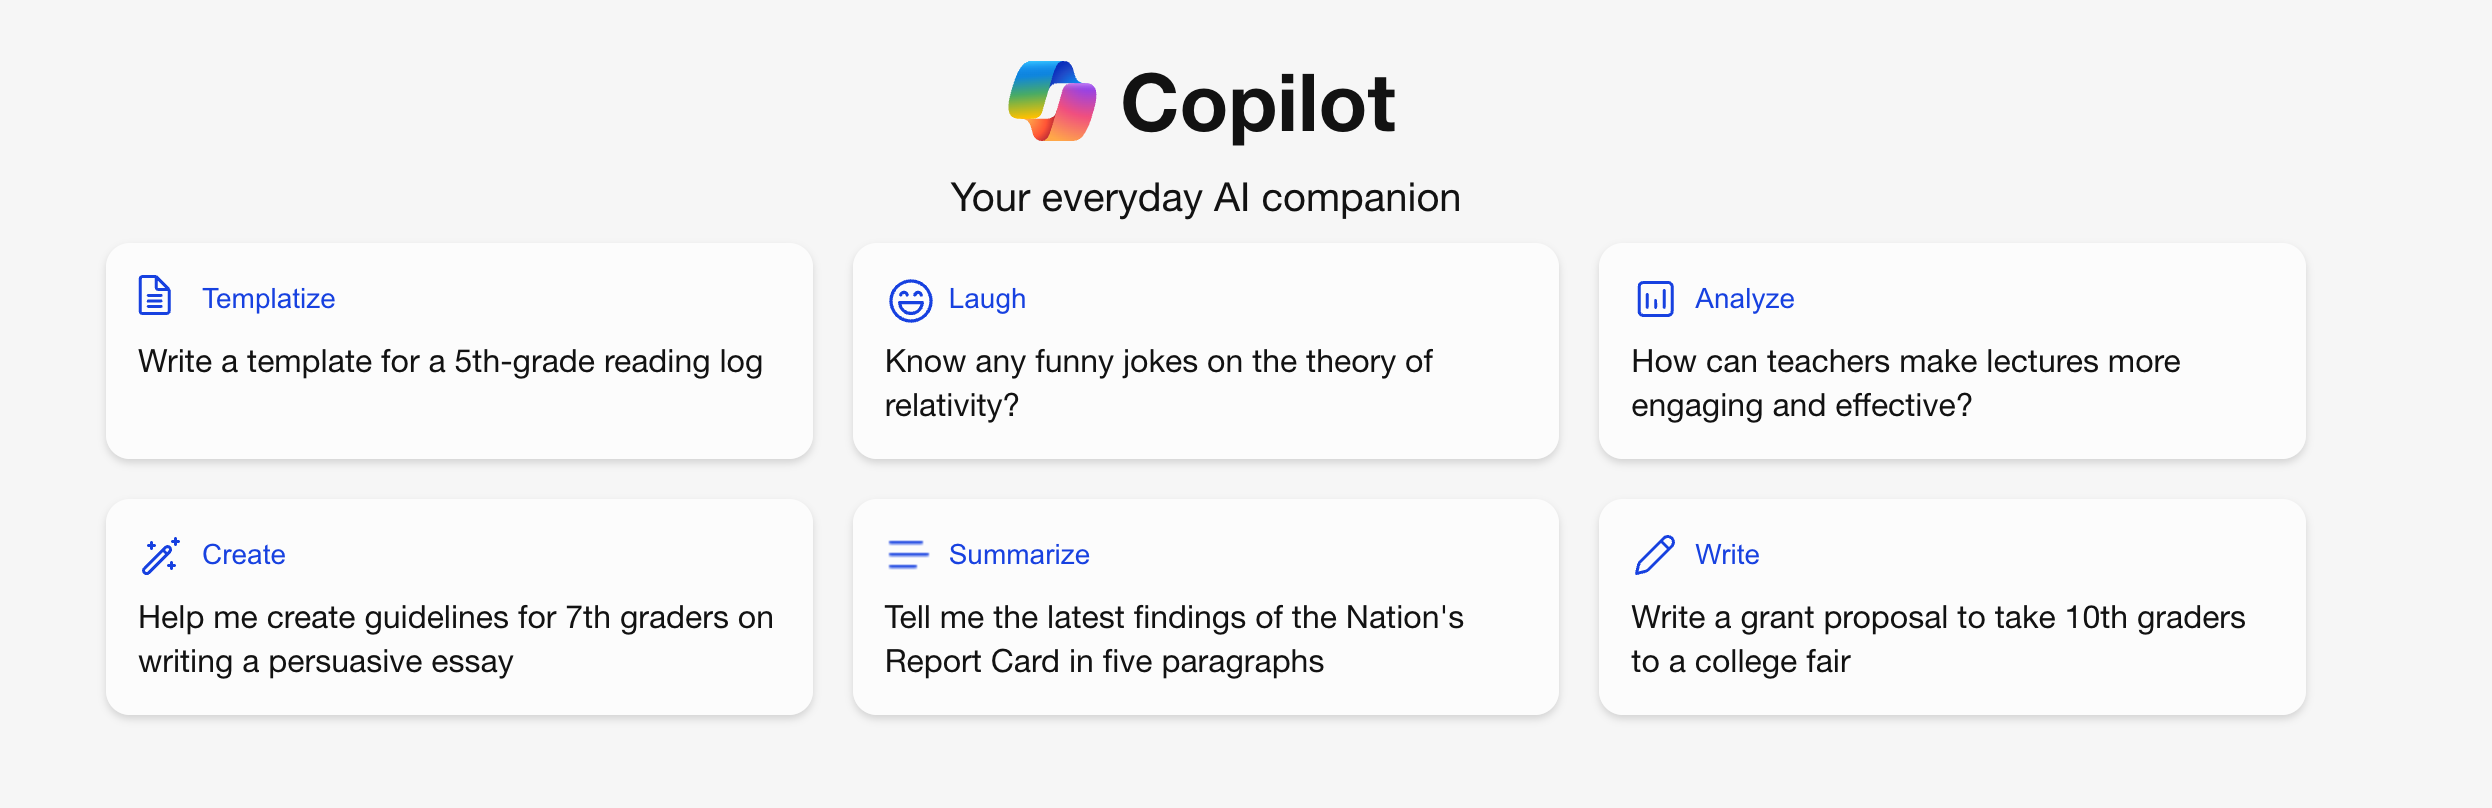 Screenshot of the top section of Microsoft Copilot, which helps you get started with AI by showing examples, like telling a joke, summarizing content or creating a lesson plan